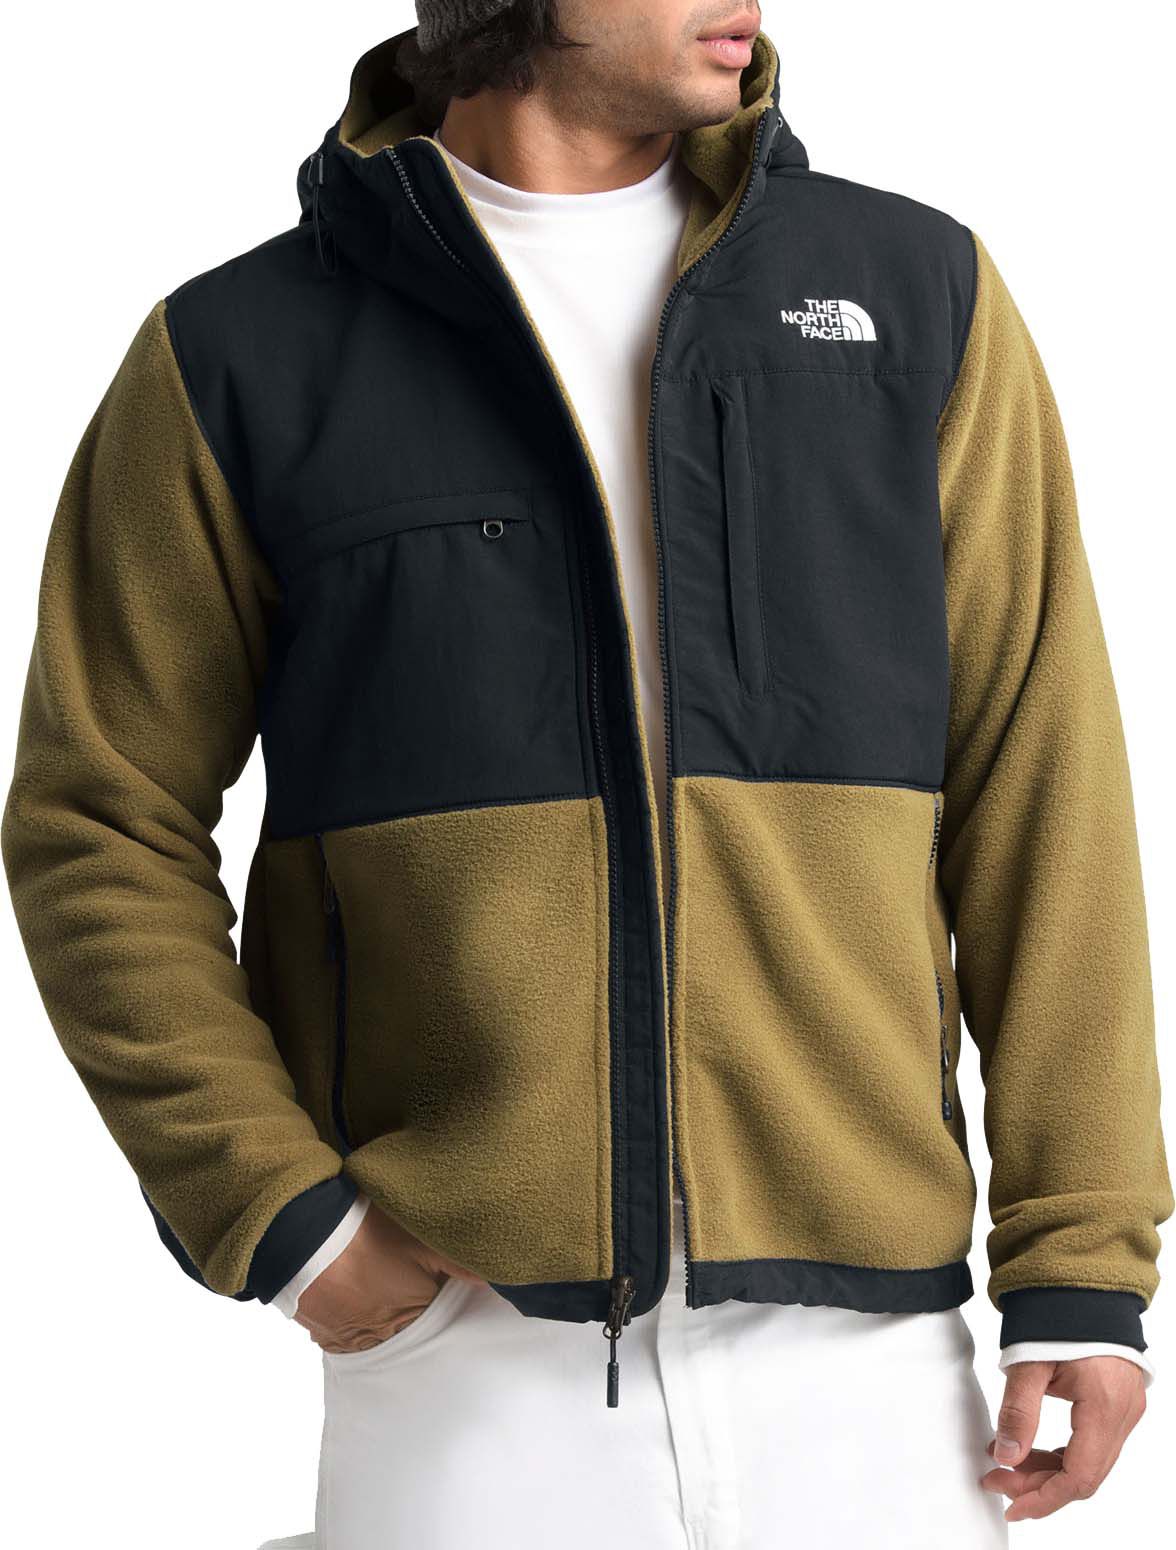 The North Face Jacket Khaki Sale Online, UP TO 58% OFF | www.rupit.com